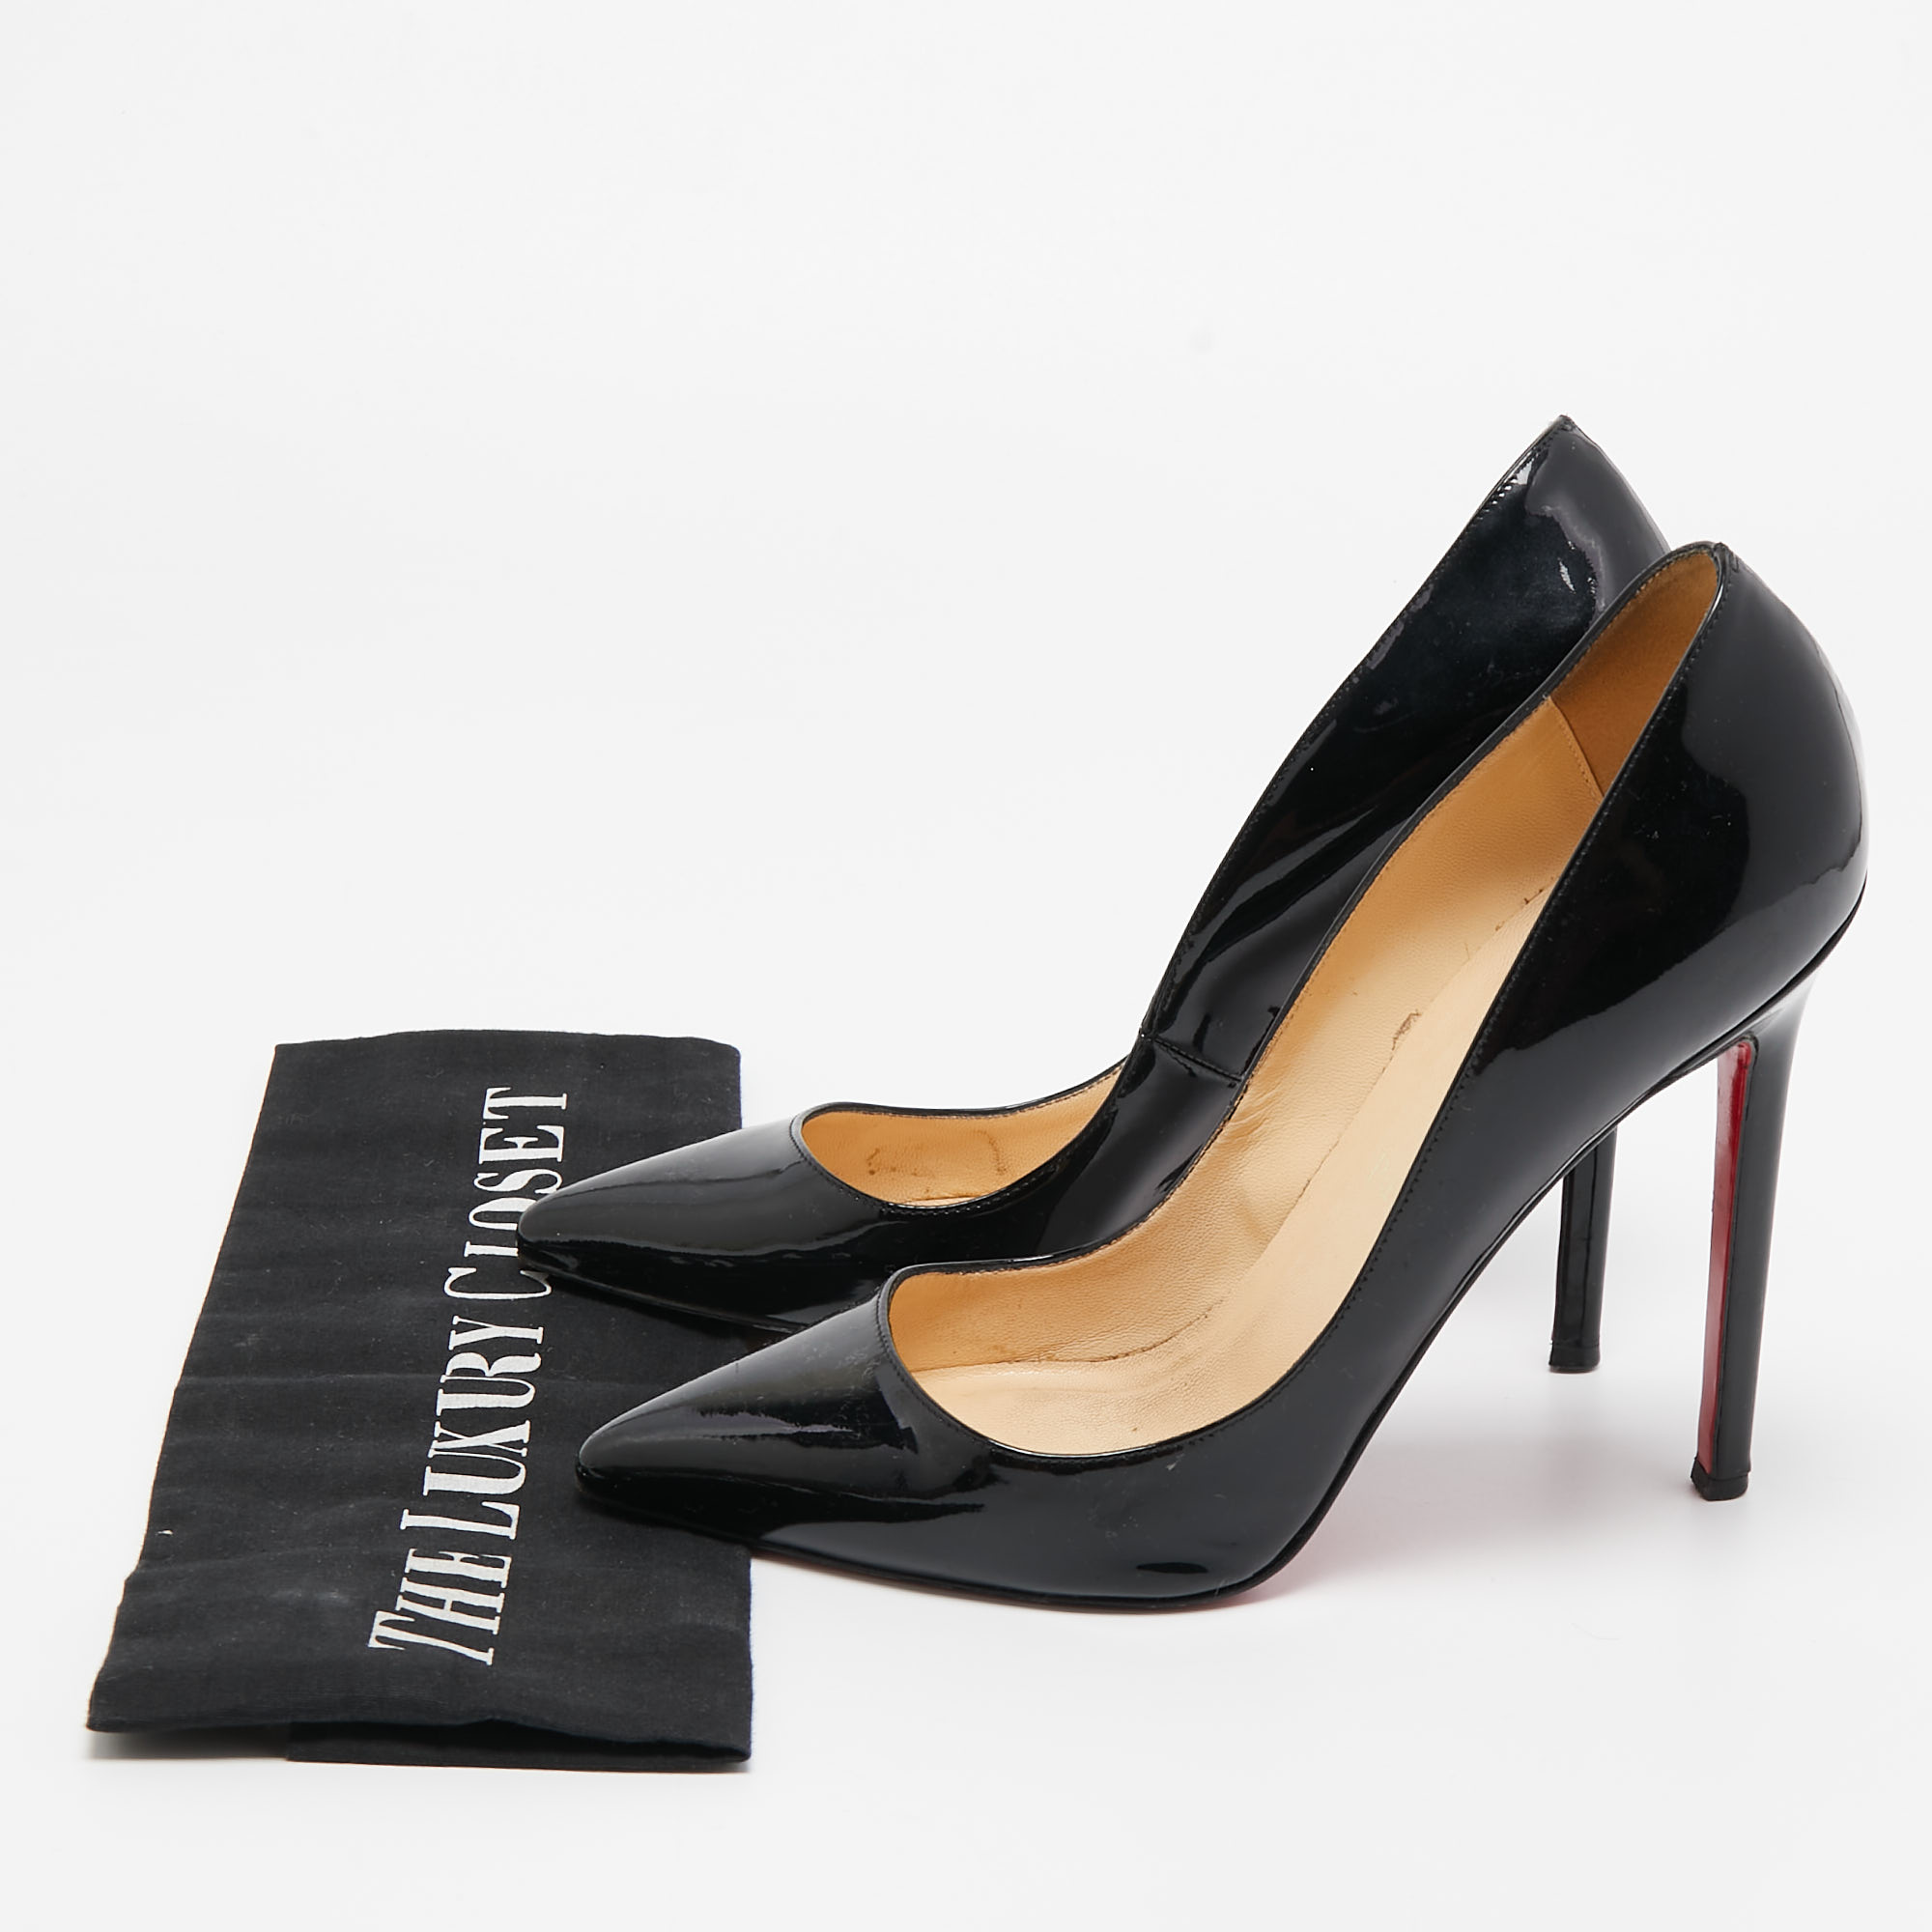 Christian Louboutin Black Pigalle Pointed Toe Pumps Size 37